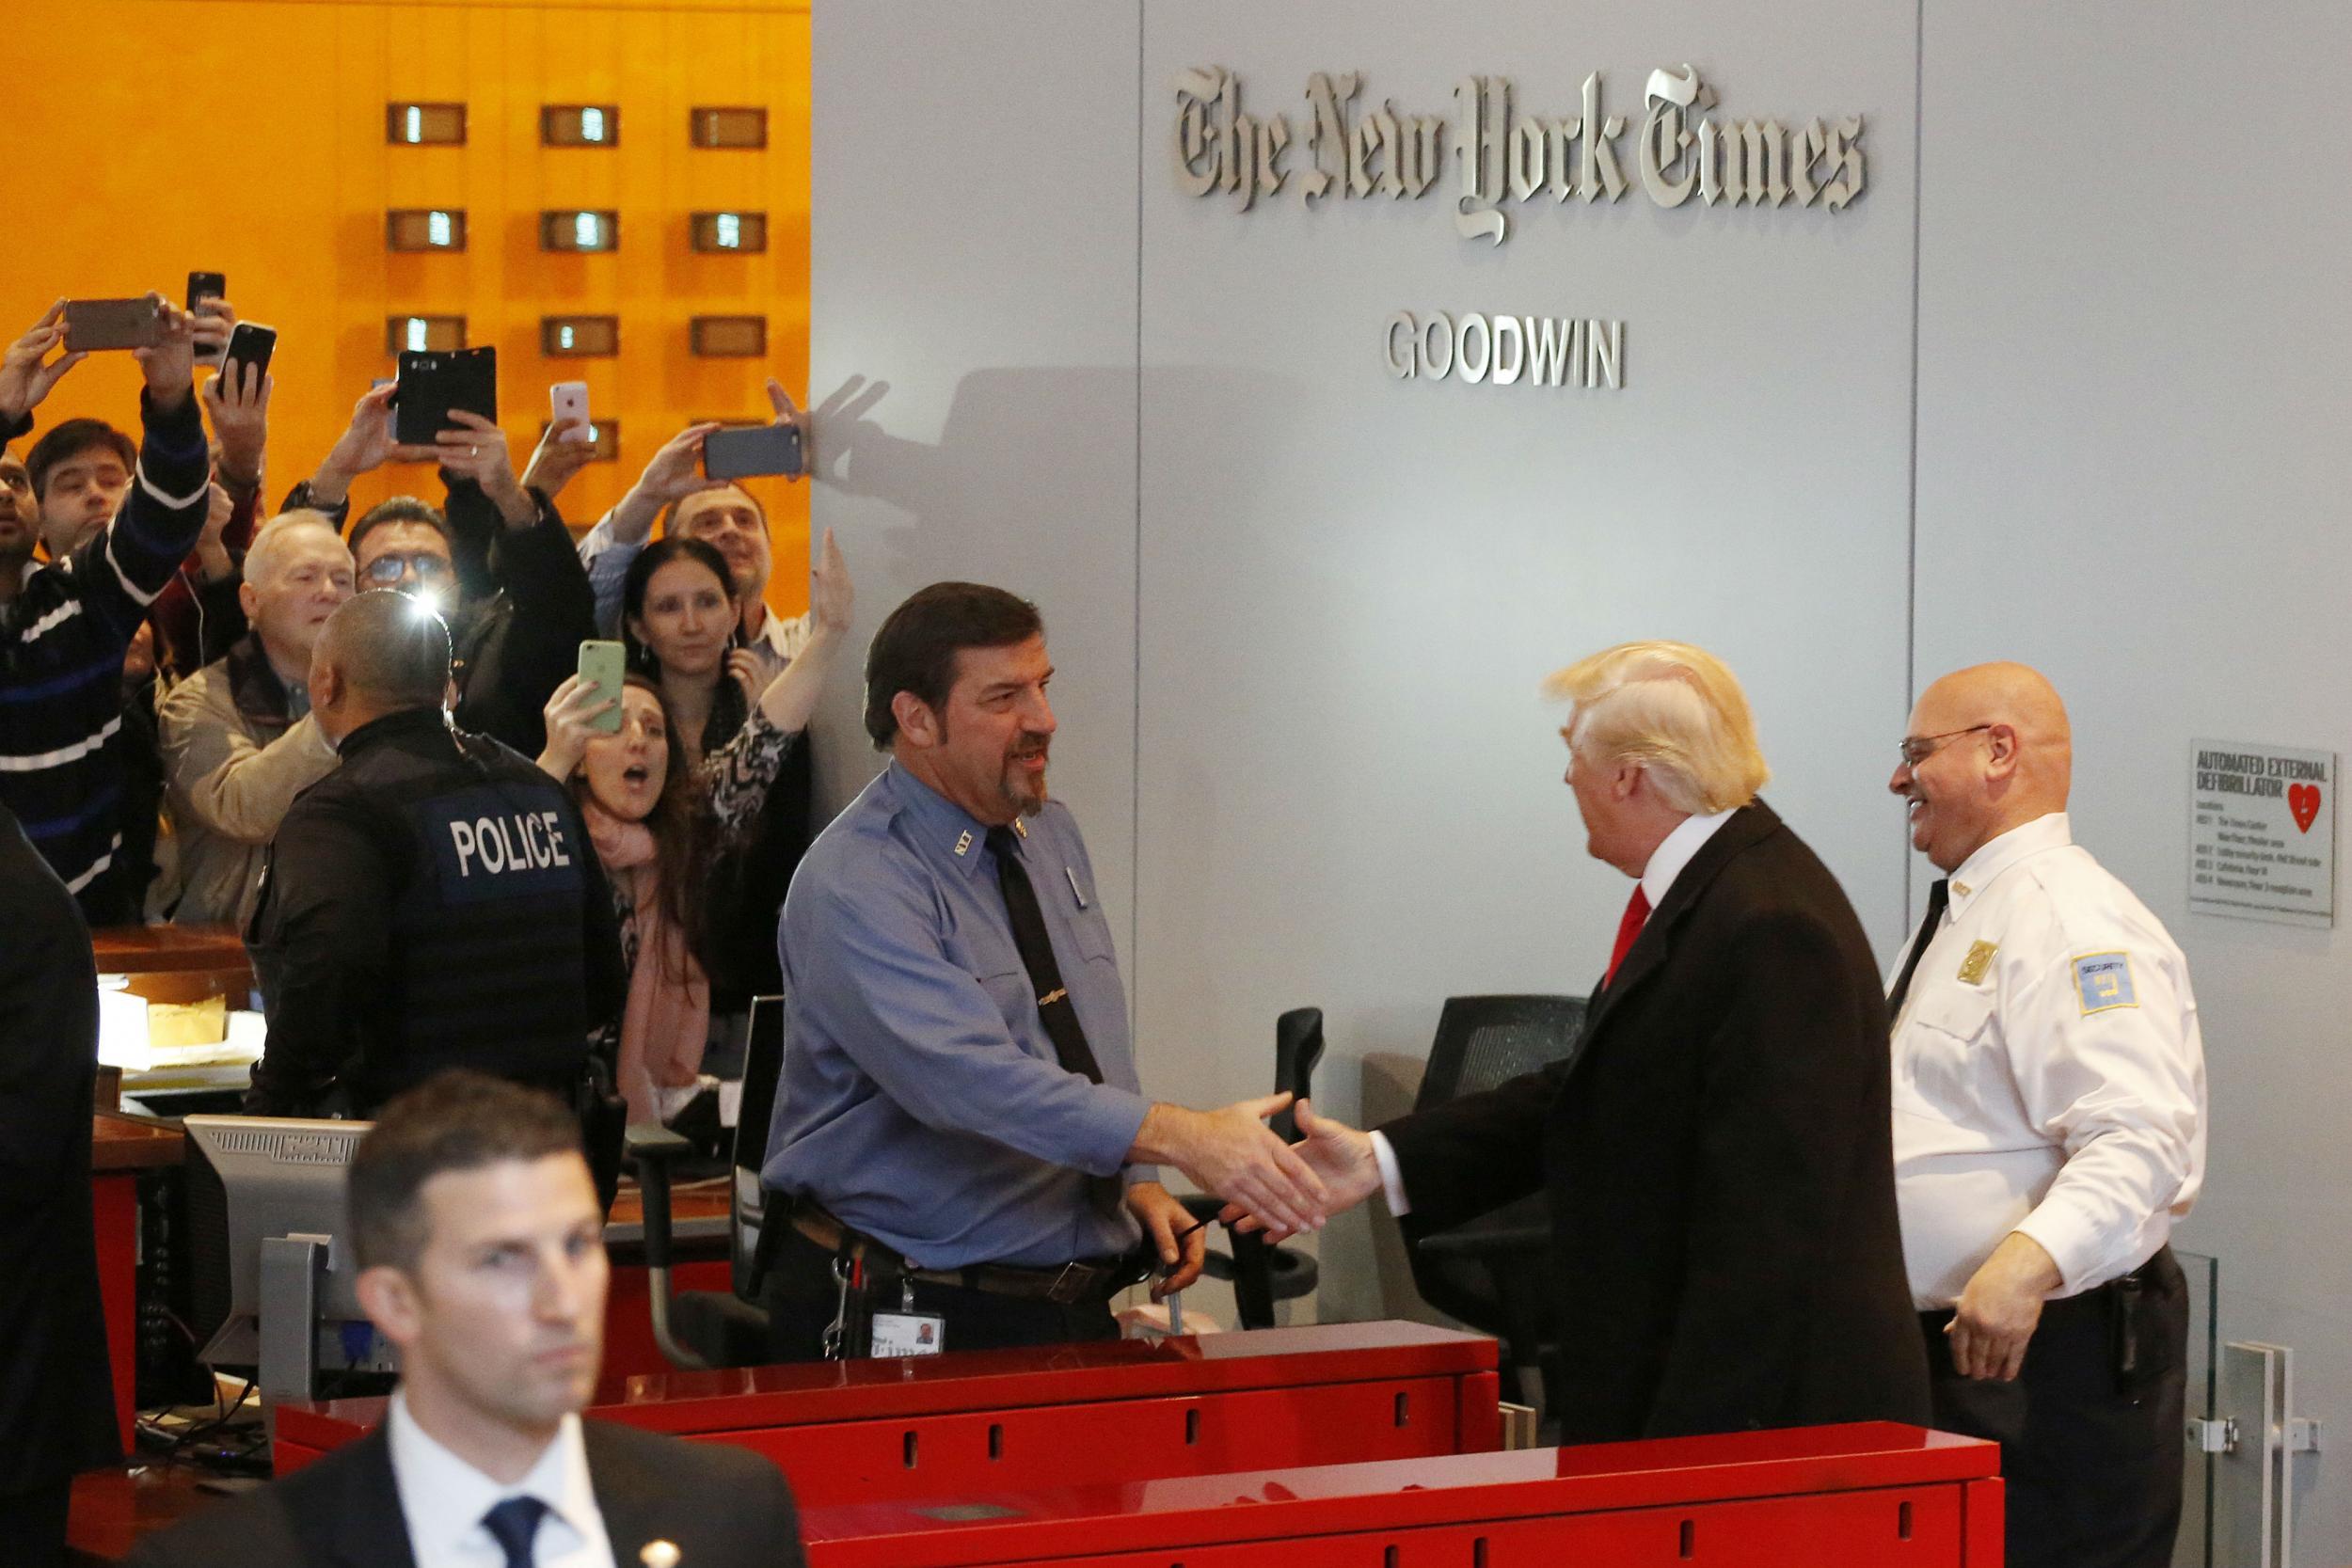 Mr Trump has long accused the New York Times of being unfair to him